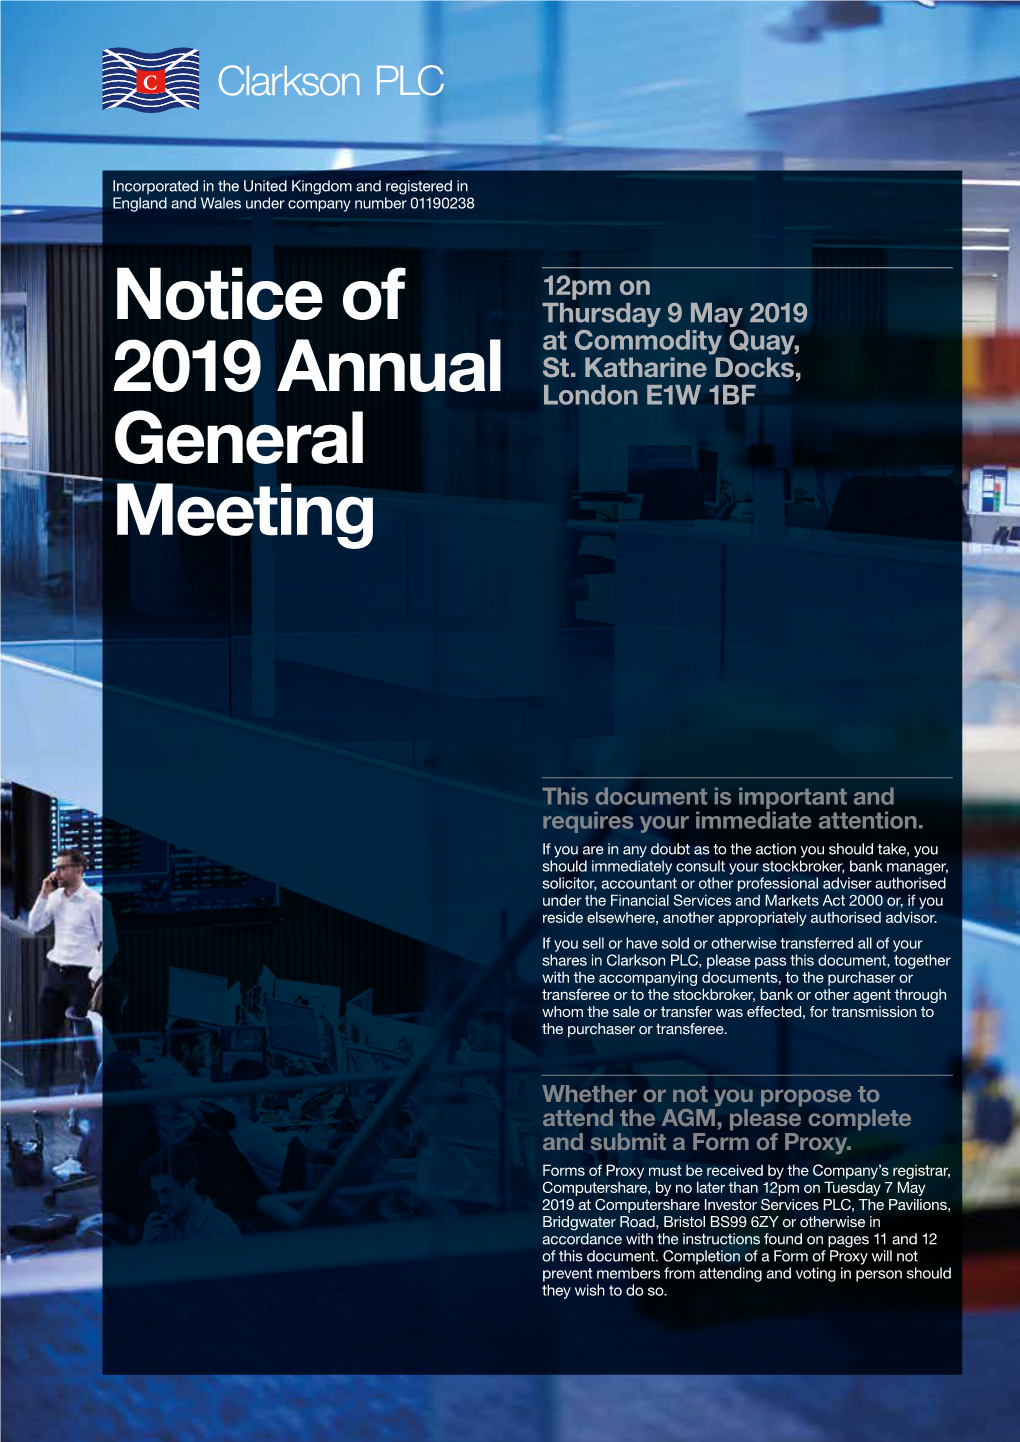 Notice of 2019 Annual General Meeting 01 Notice of Annual General Meeting